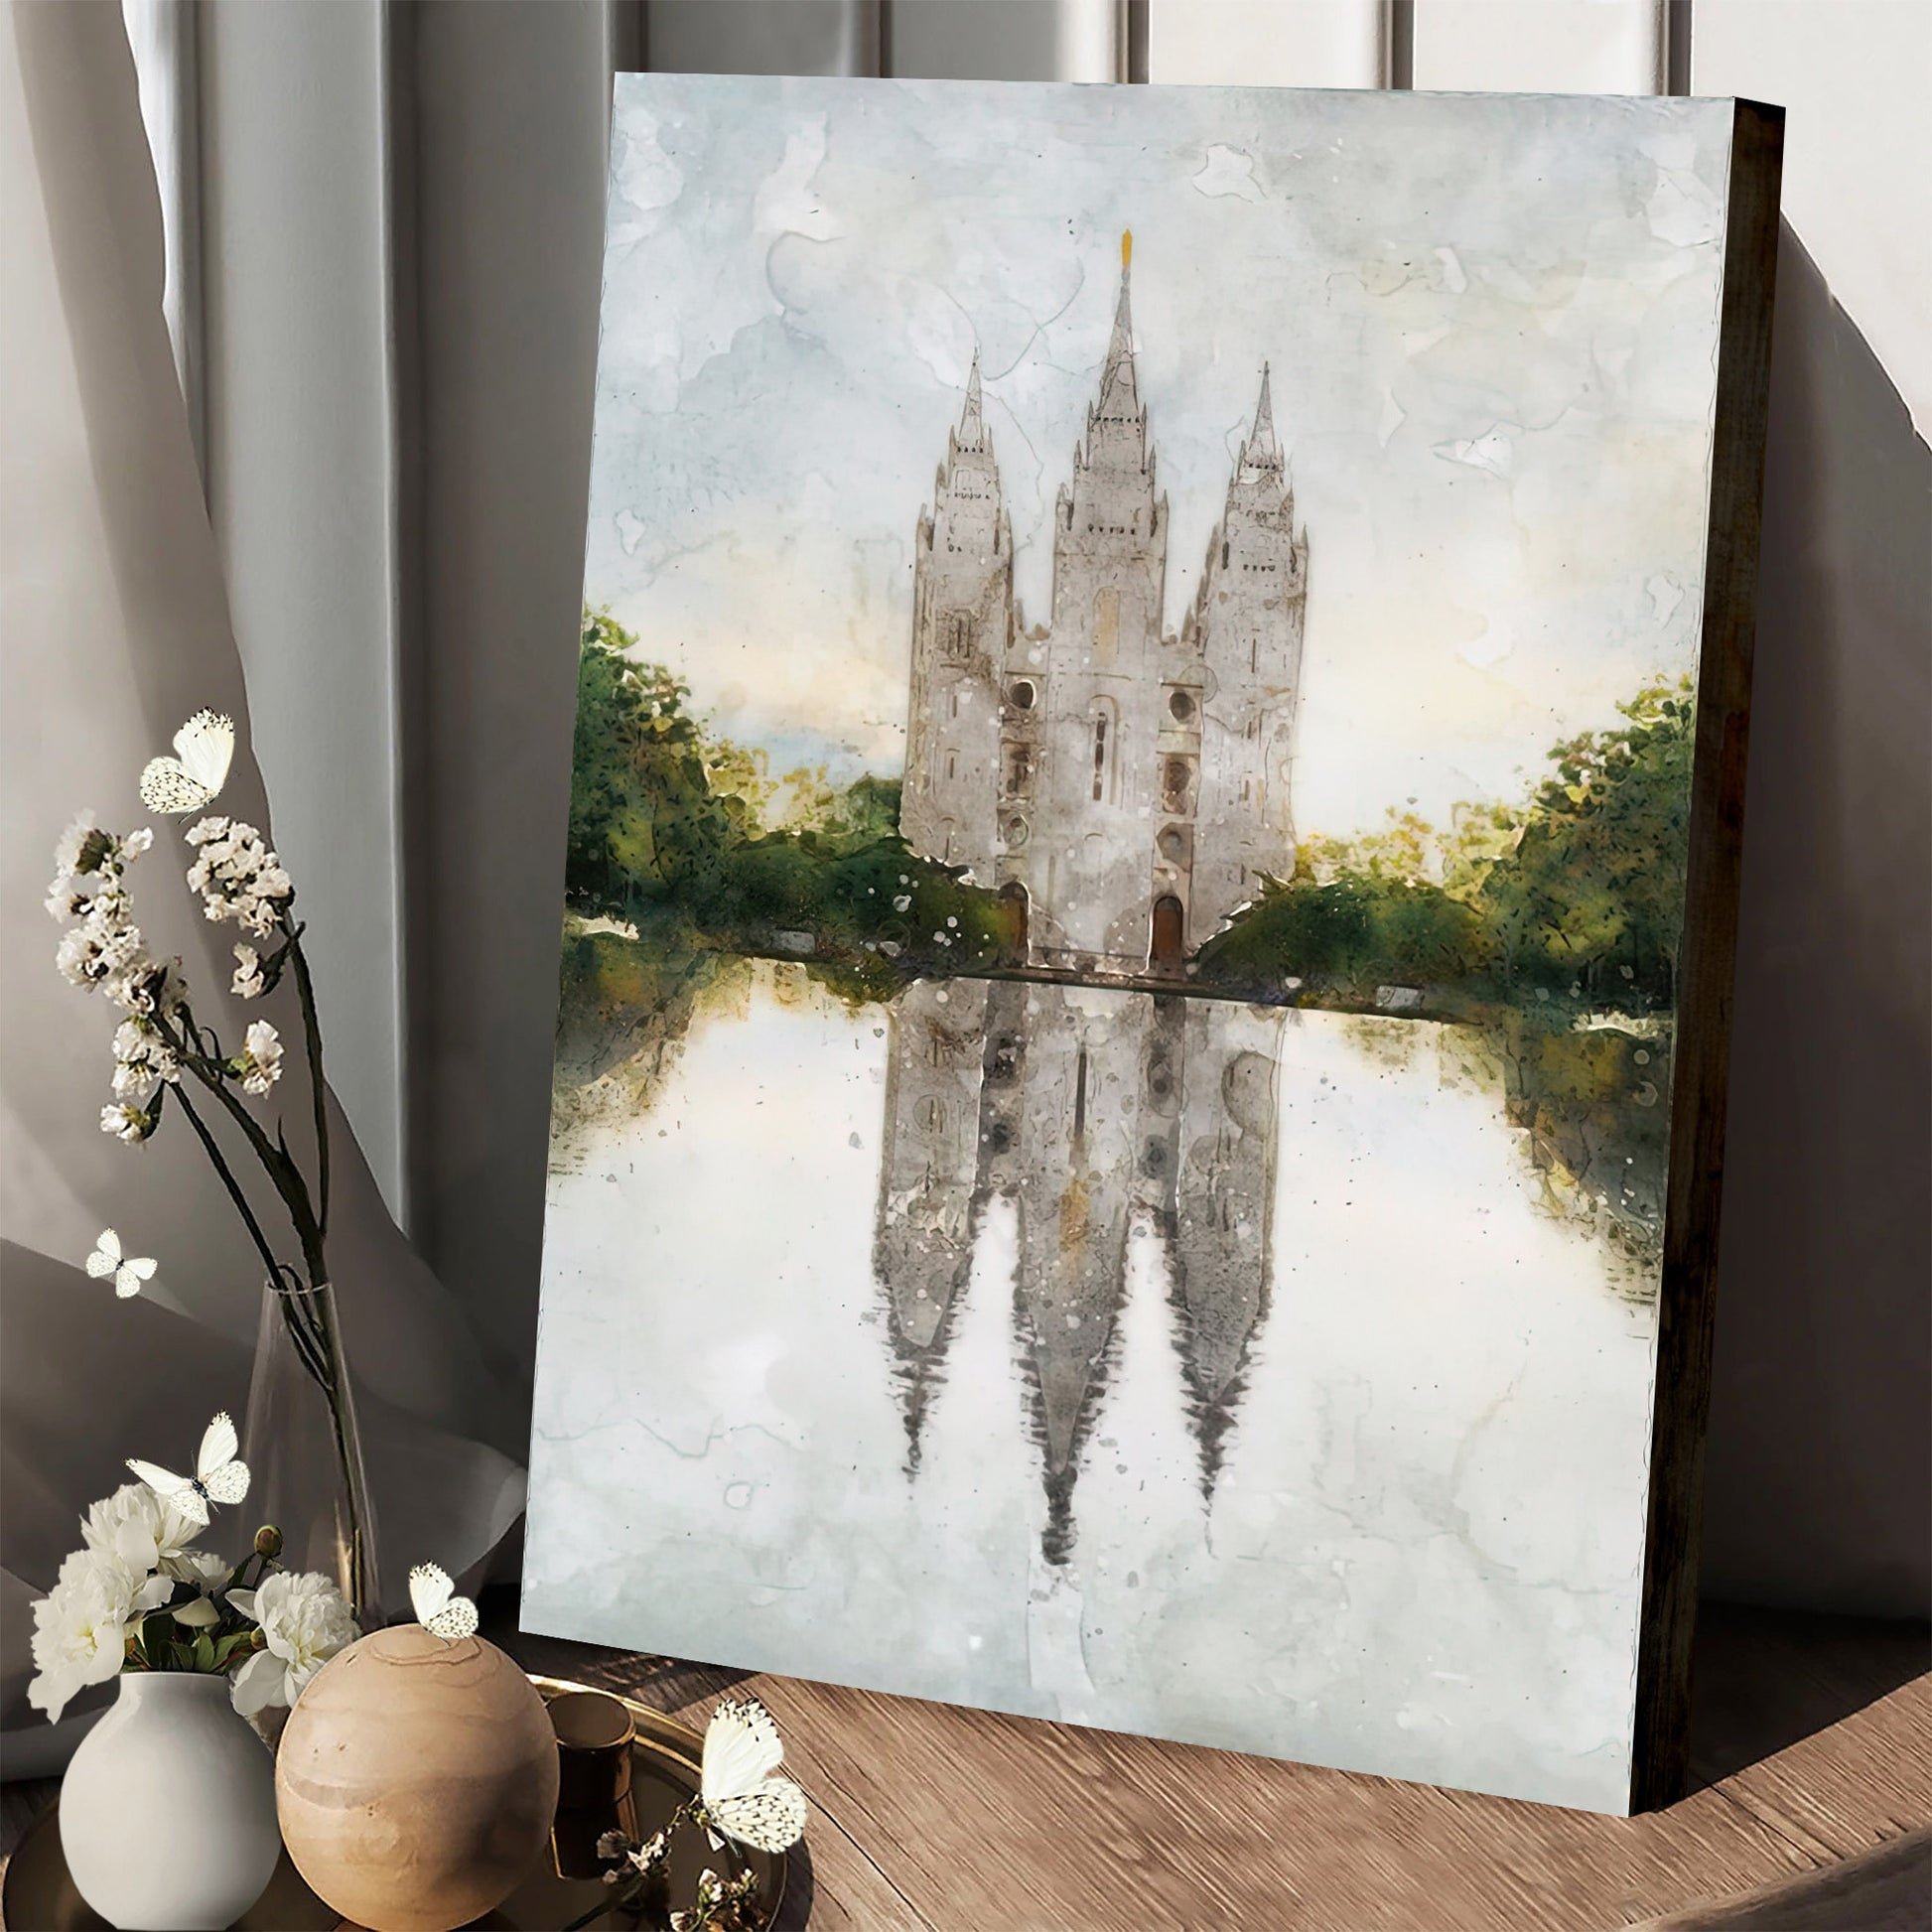 Salt Lake Temple 4 Canvas Pictures - Temple Canvas Wall Decor - Christian Canvas Wall Art